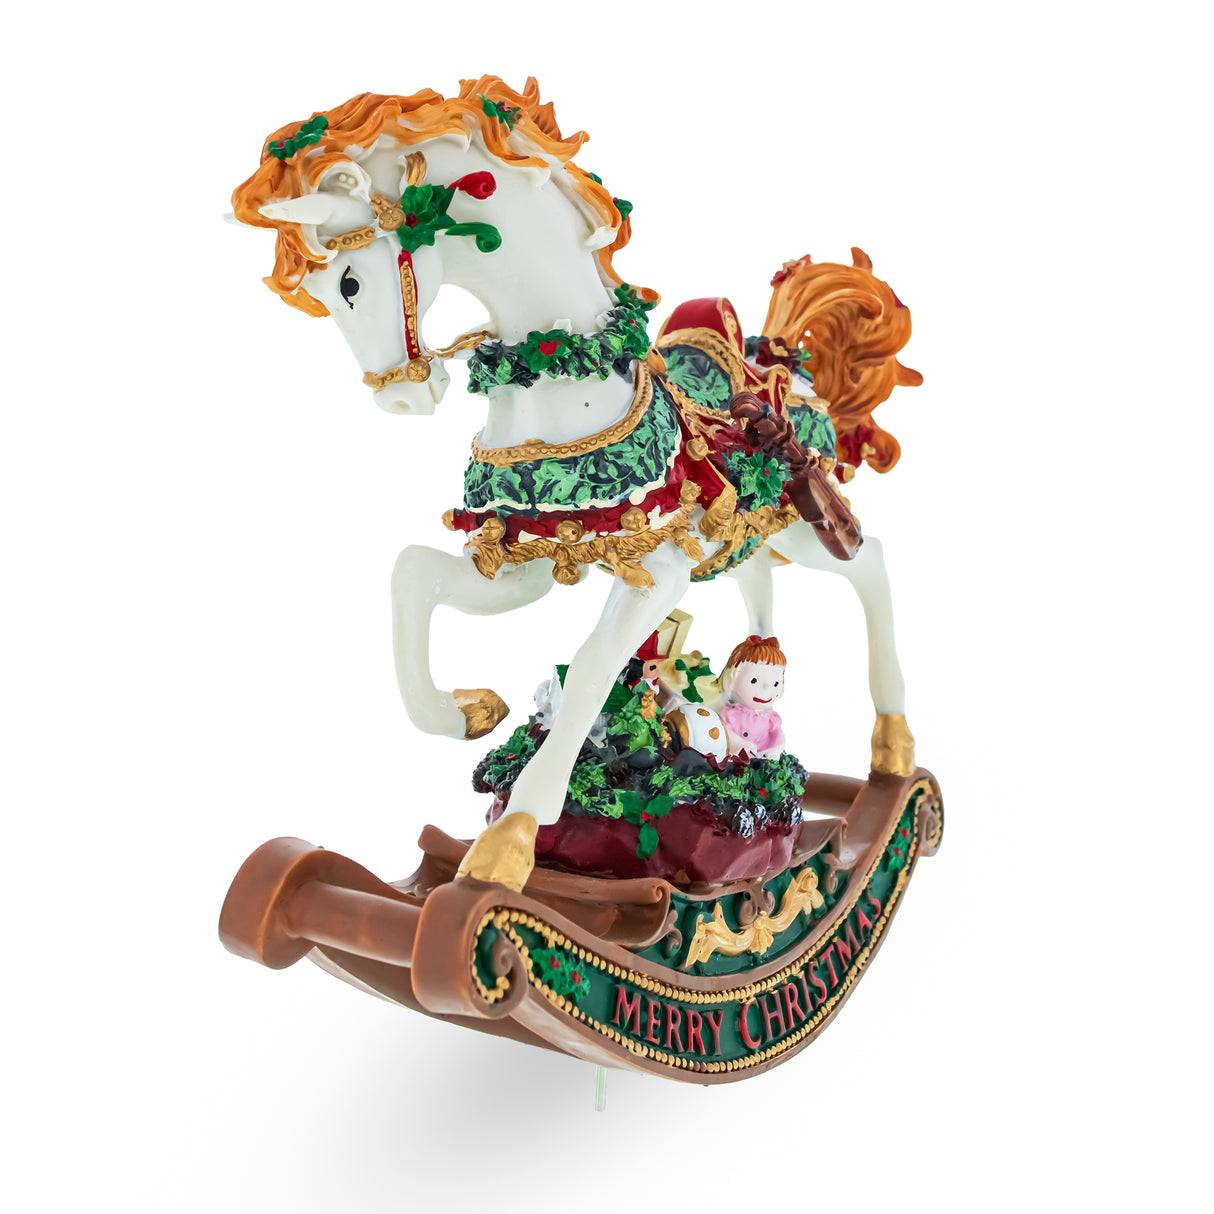 Harmonious Rocking Horse Carrying Gifts: Christmas Musical  Figurine 8-Inch in Multi color,  shape